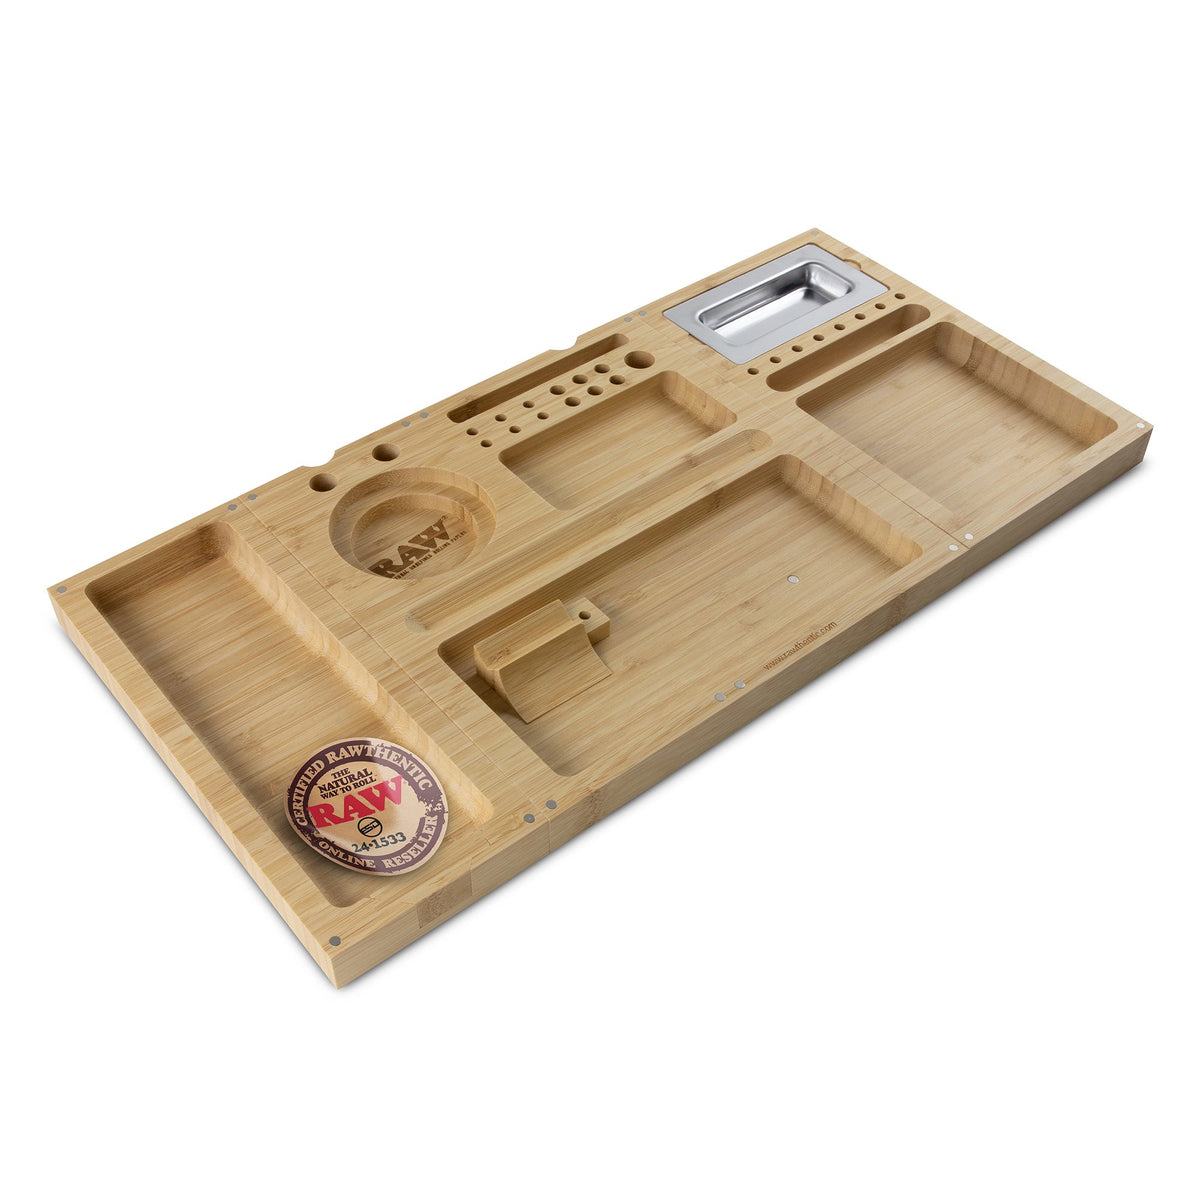 RAW Triple Flip Bamboo Rolling Tray Rolling Trays WAR00144-MUSA01 esd-official